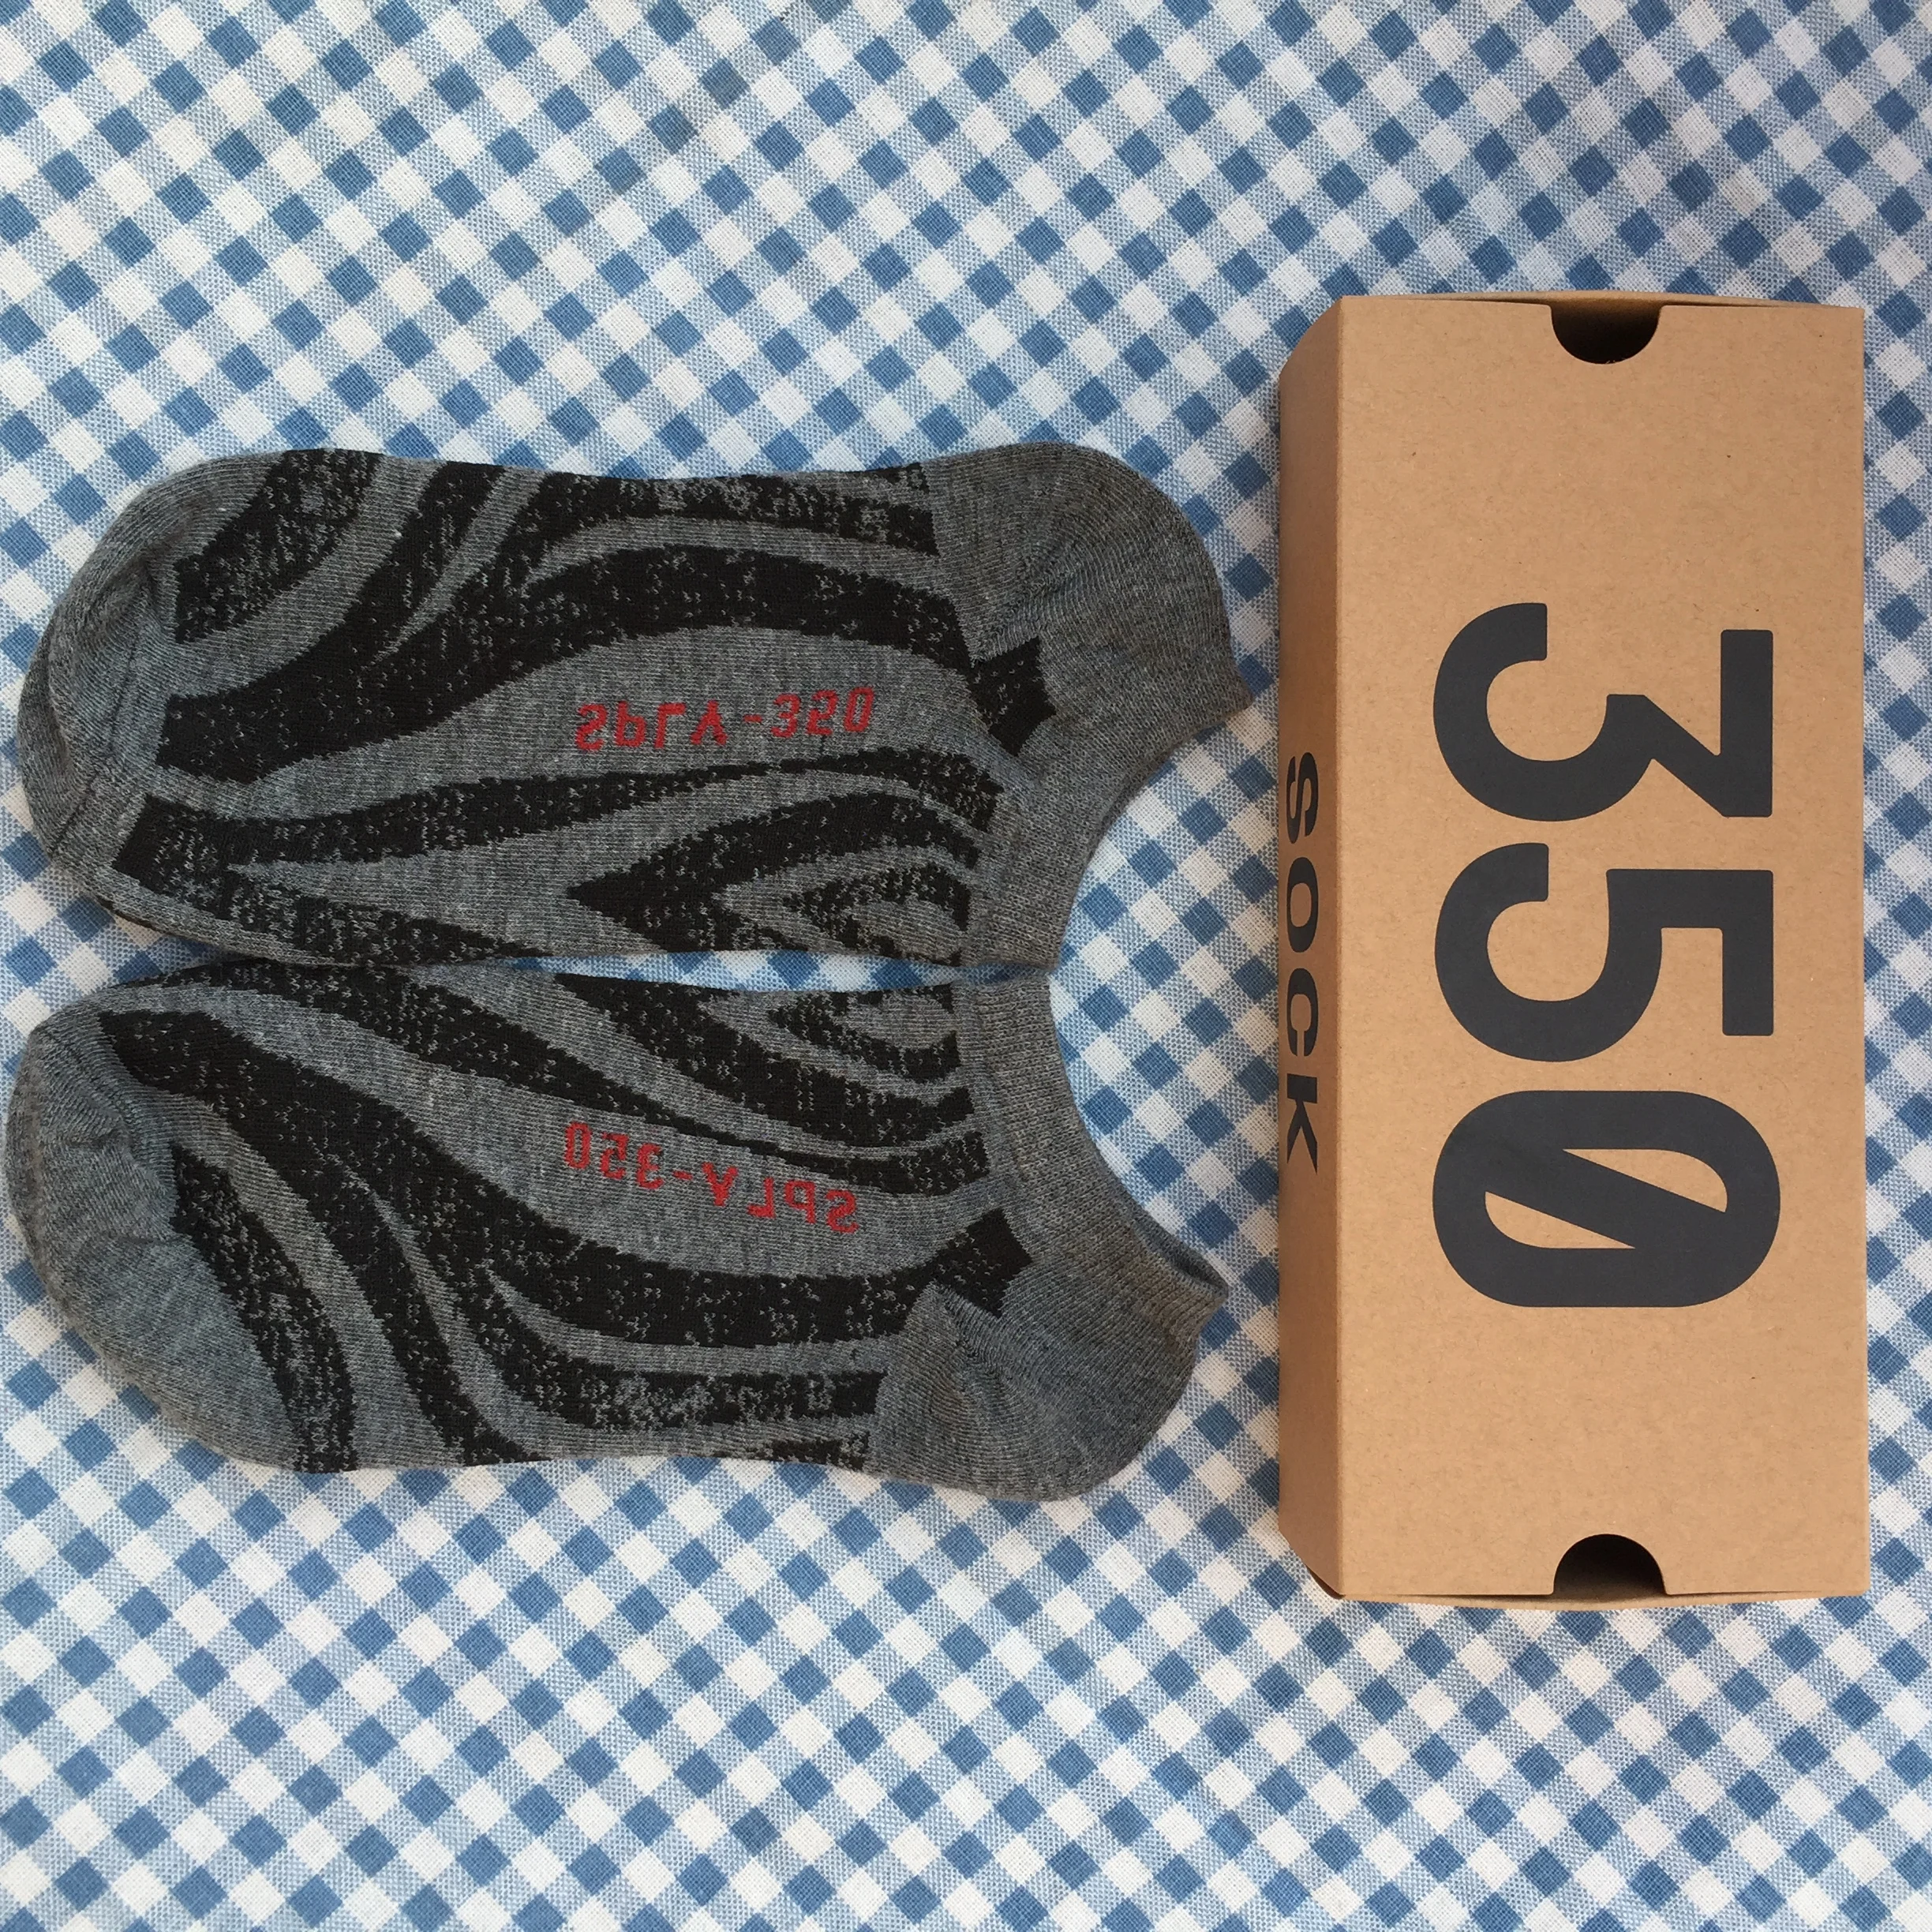 

YEEZY BOOST 350 BOX packed beluga yeezy v2 socks colors assorted, Yeezy shoes design